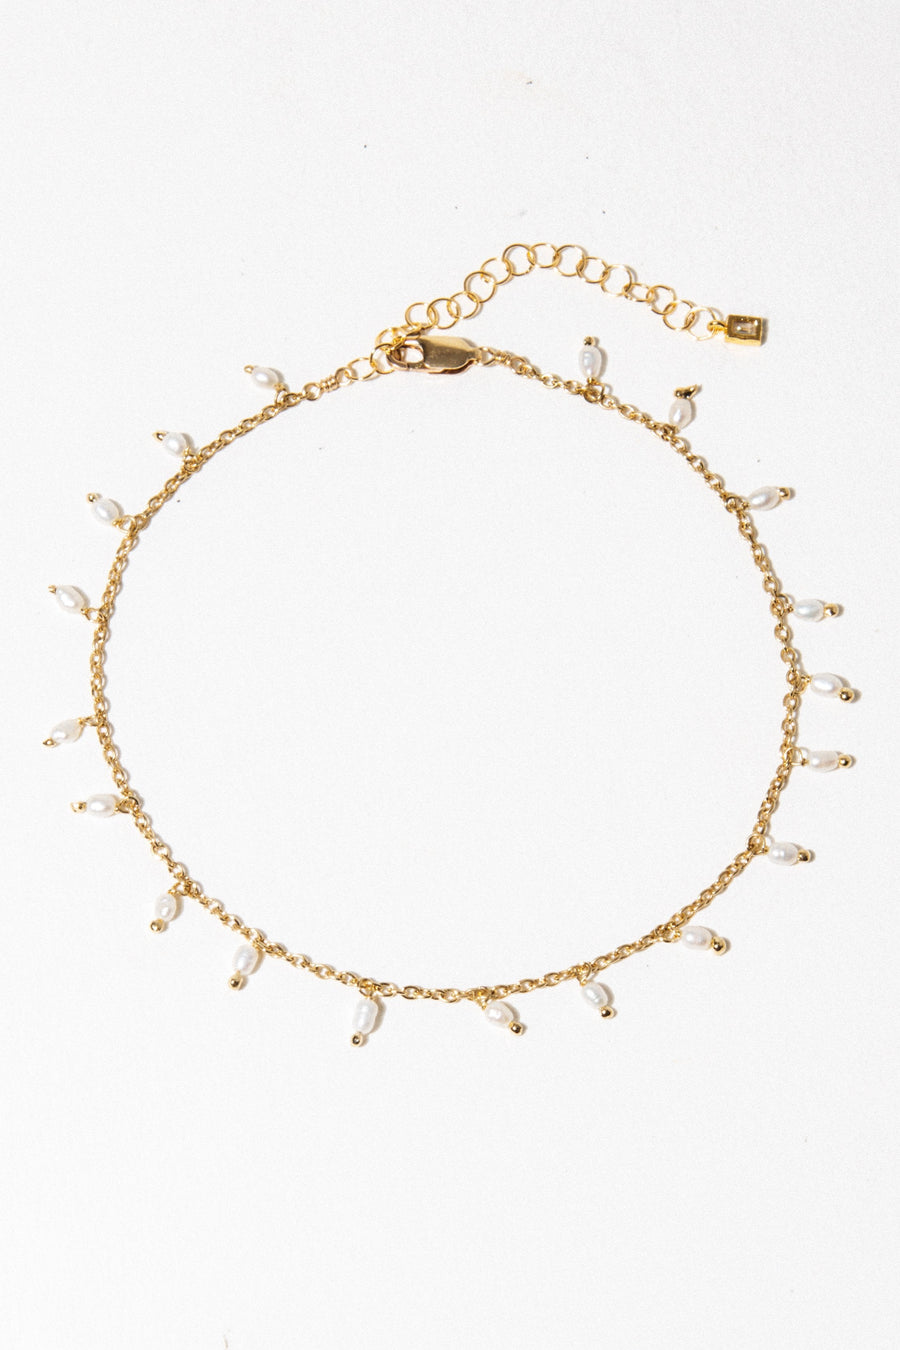 Goddess Jewelry Gold Dainty Pearl Anklet